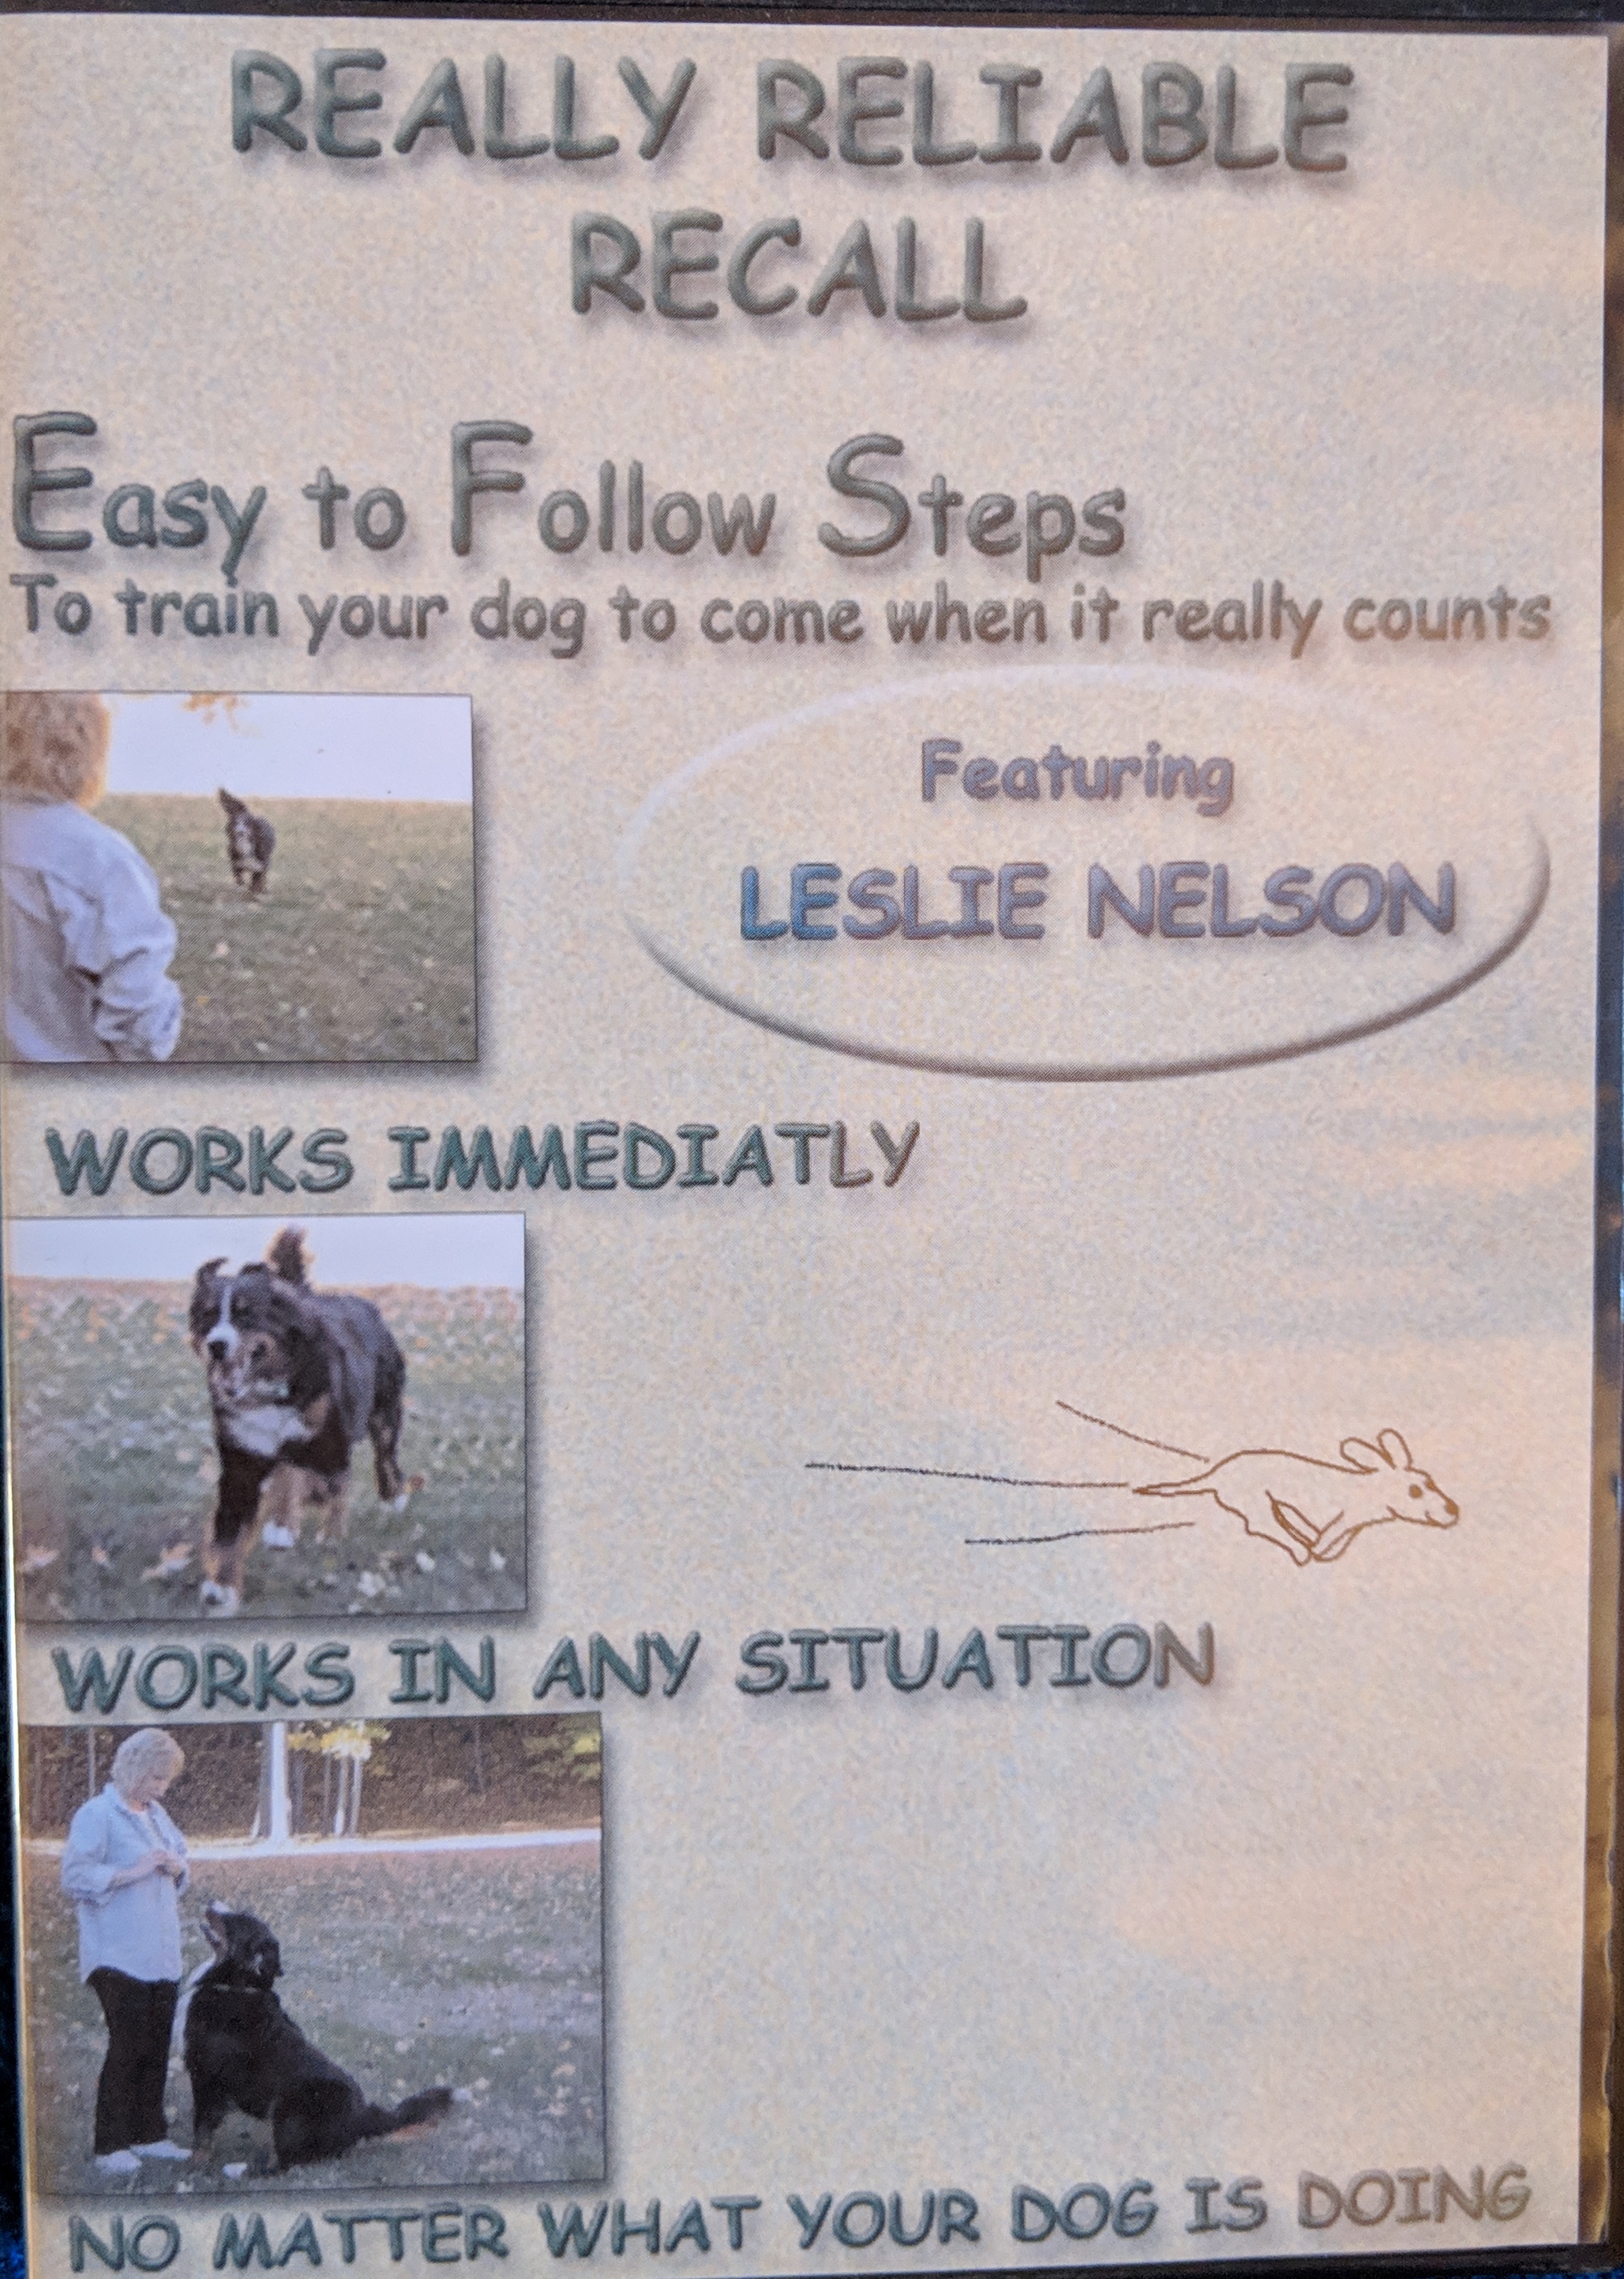 Really Reliable Recall (DVD and booklet) by Leslie Nelson